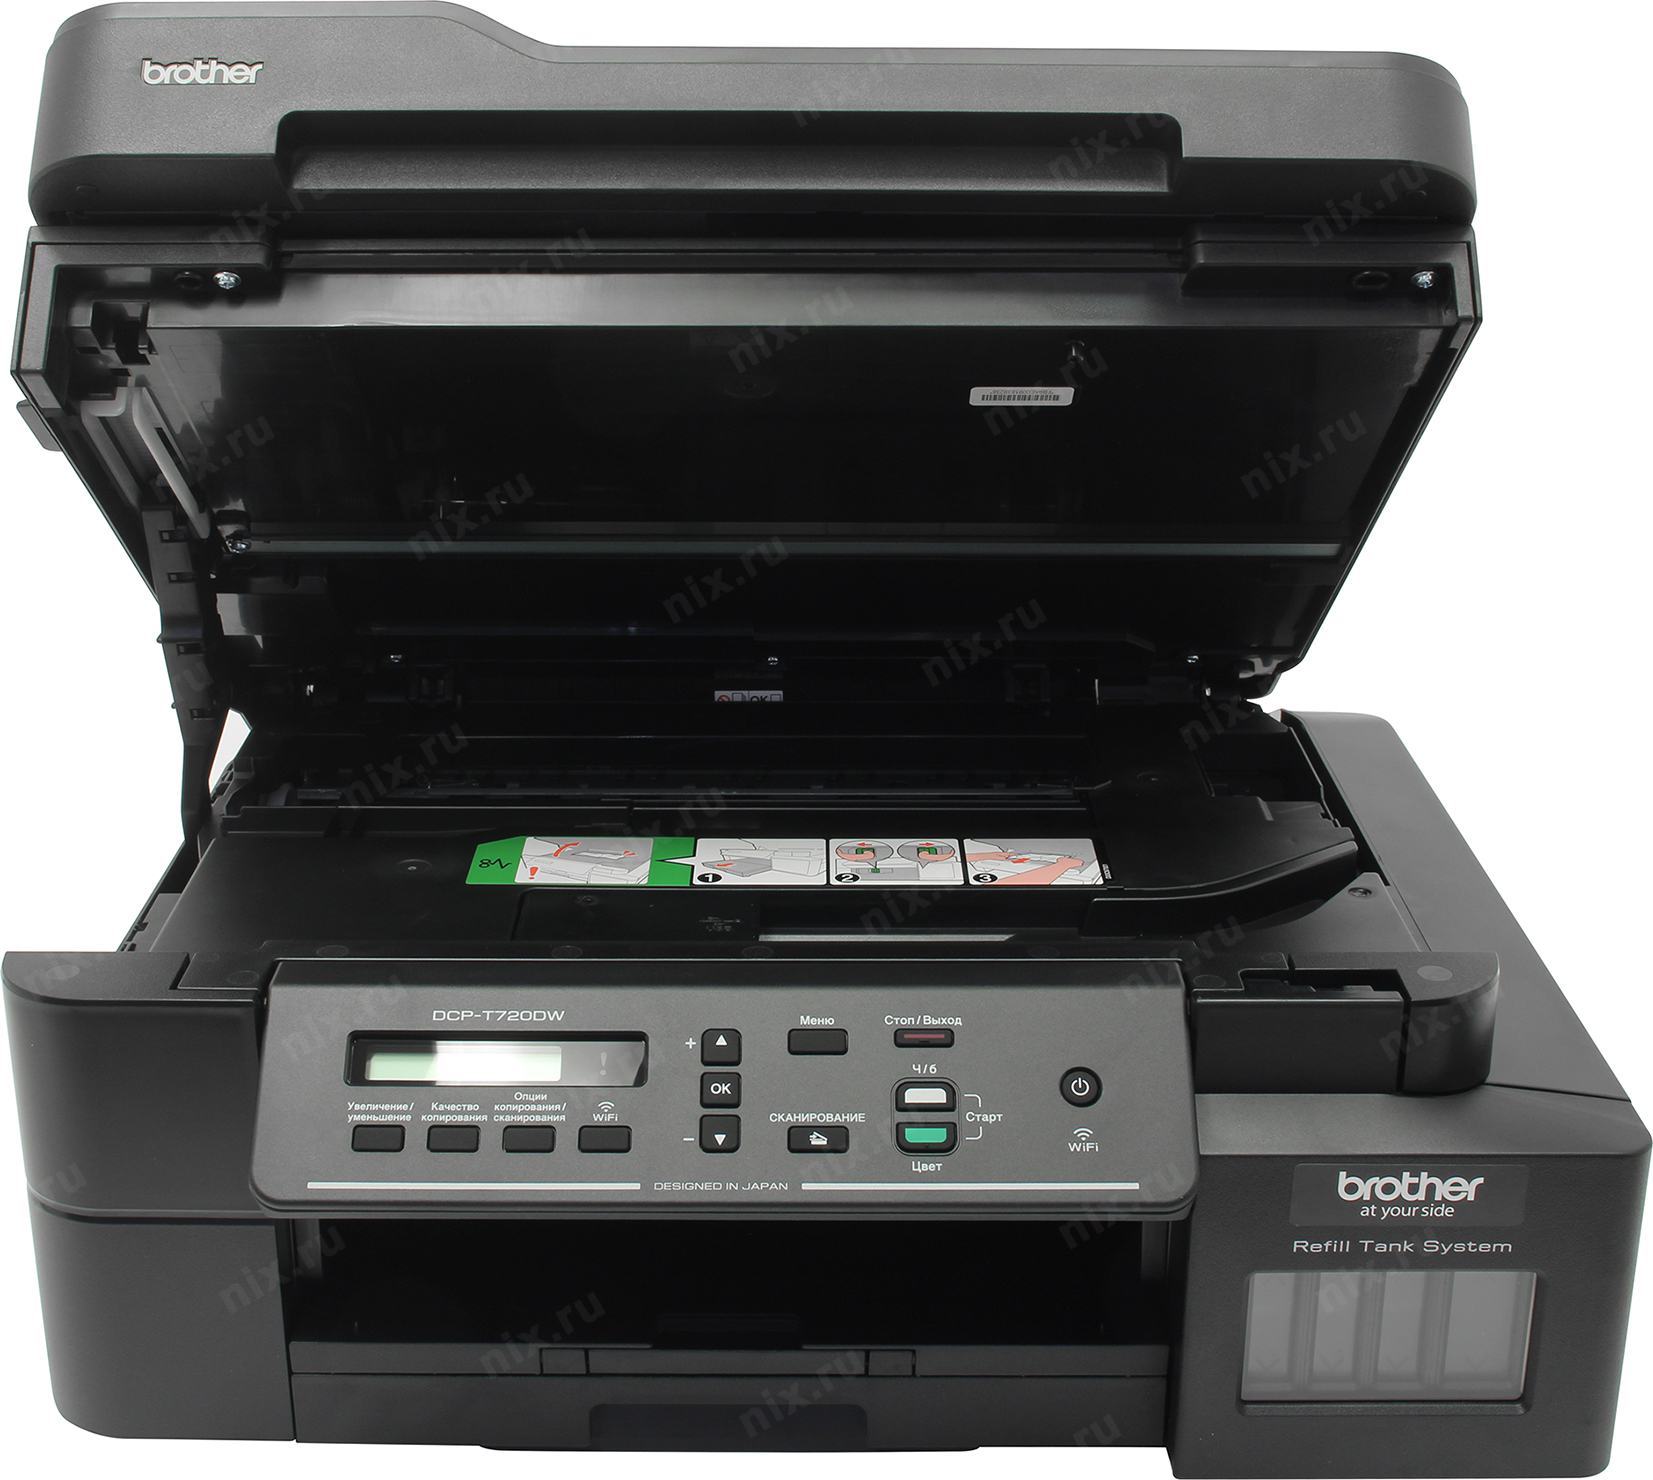 Brother INKBENEFIT Plus DCP-t720dw. Brother DCP-t720dw. МФУ струйный brother INKBENEFIT Plus DCP-t520w. Brother DCP-t720dw INKBENEFIT Plus, цветн.. Мфу струйный brother inkbenefit plus